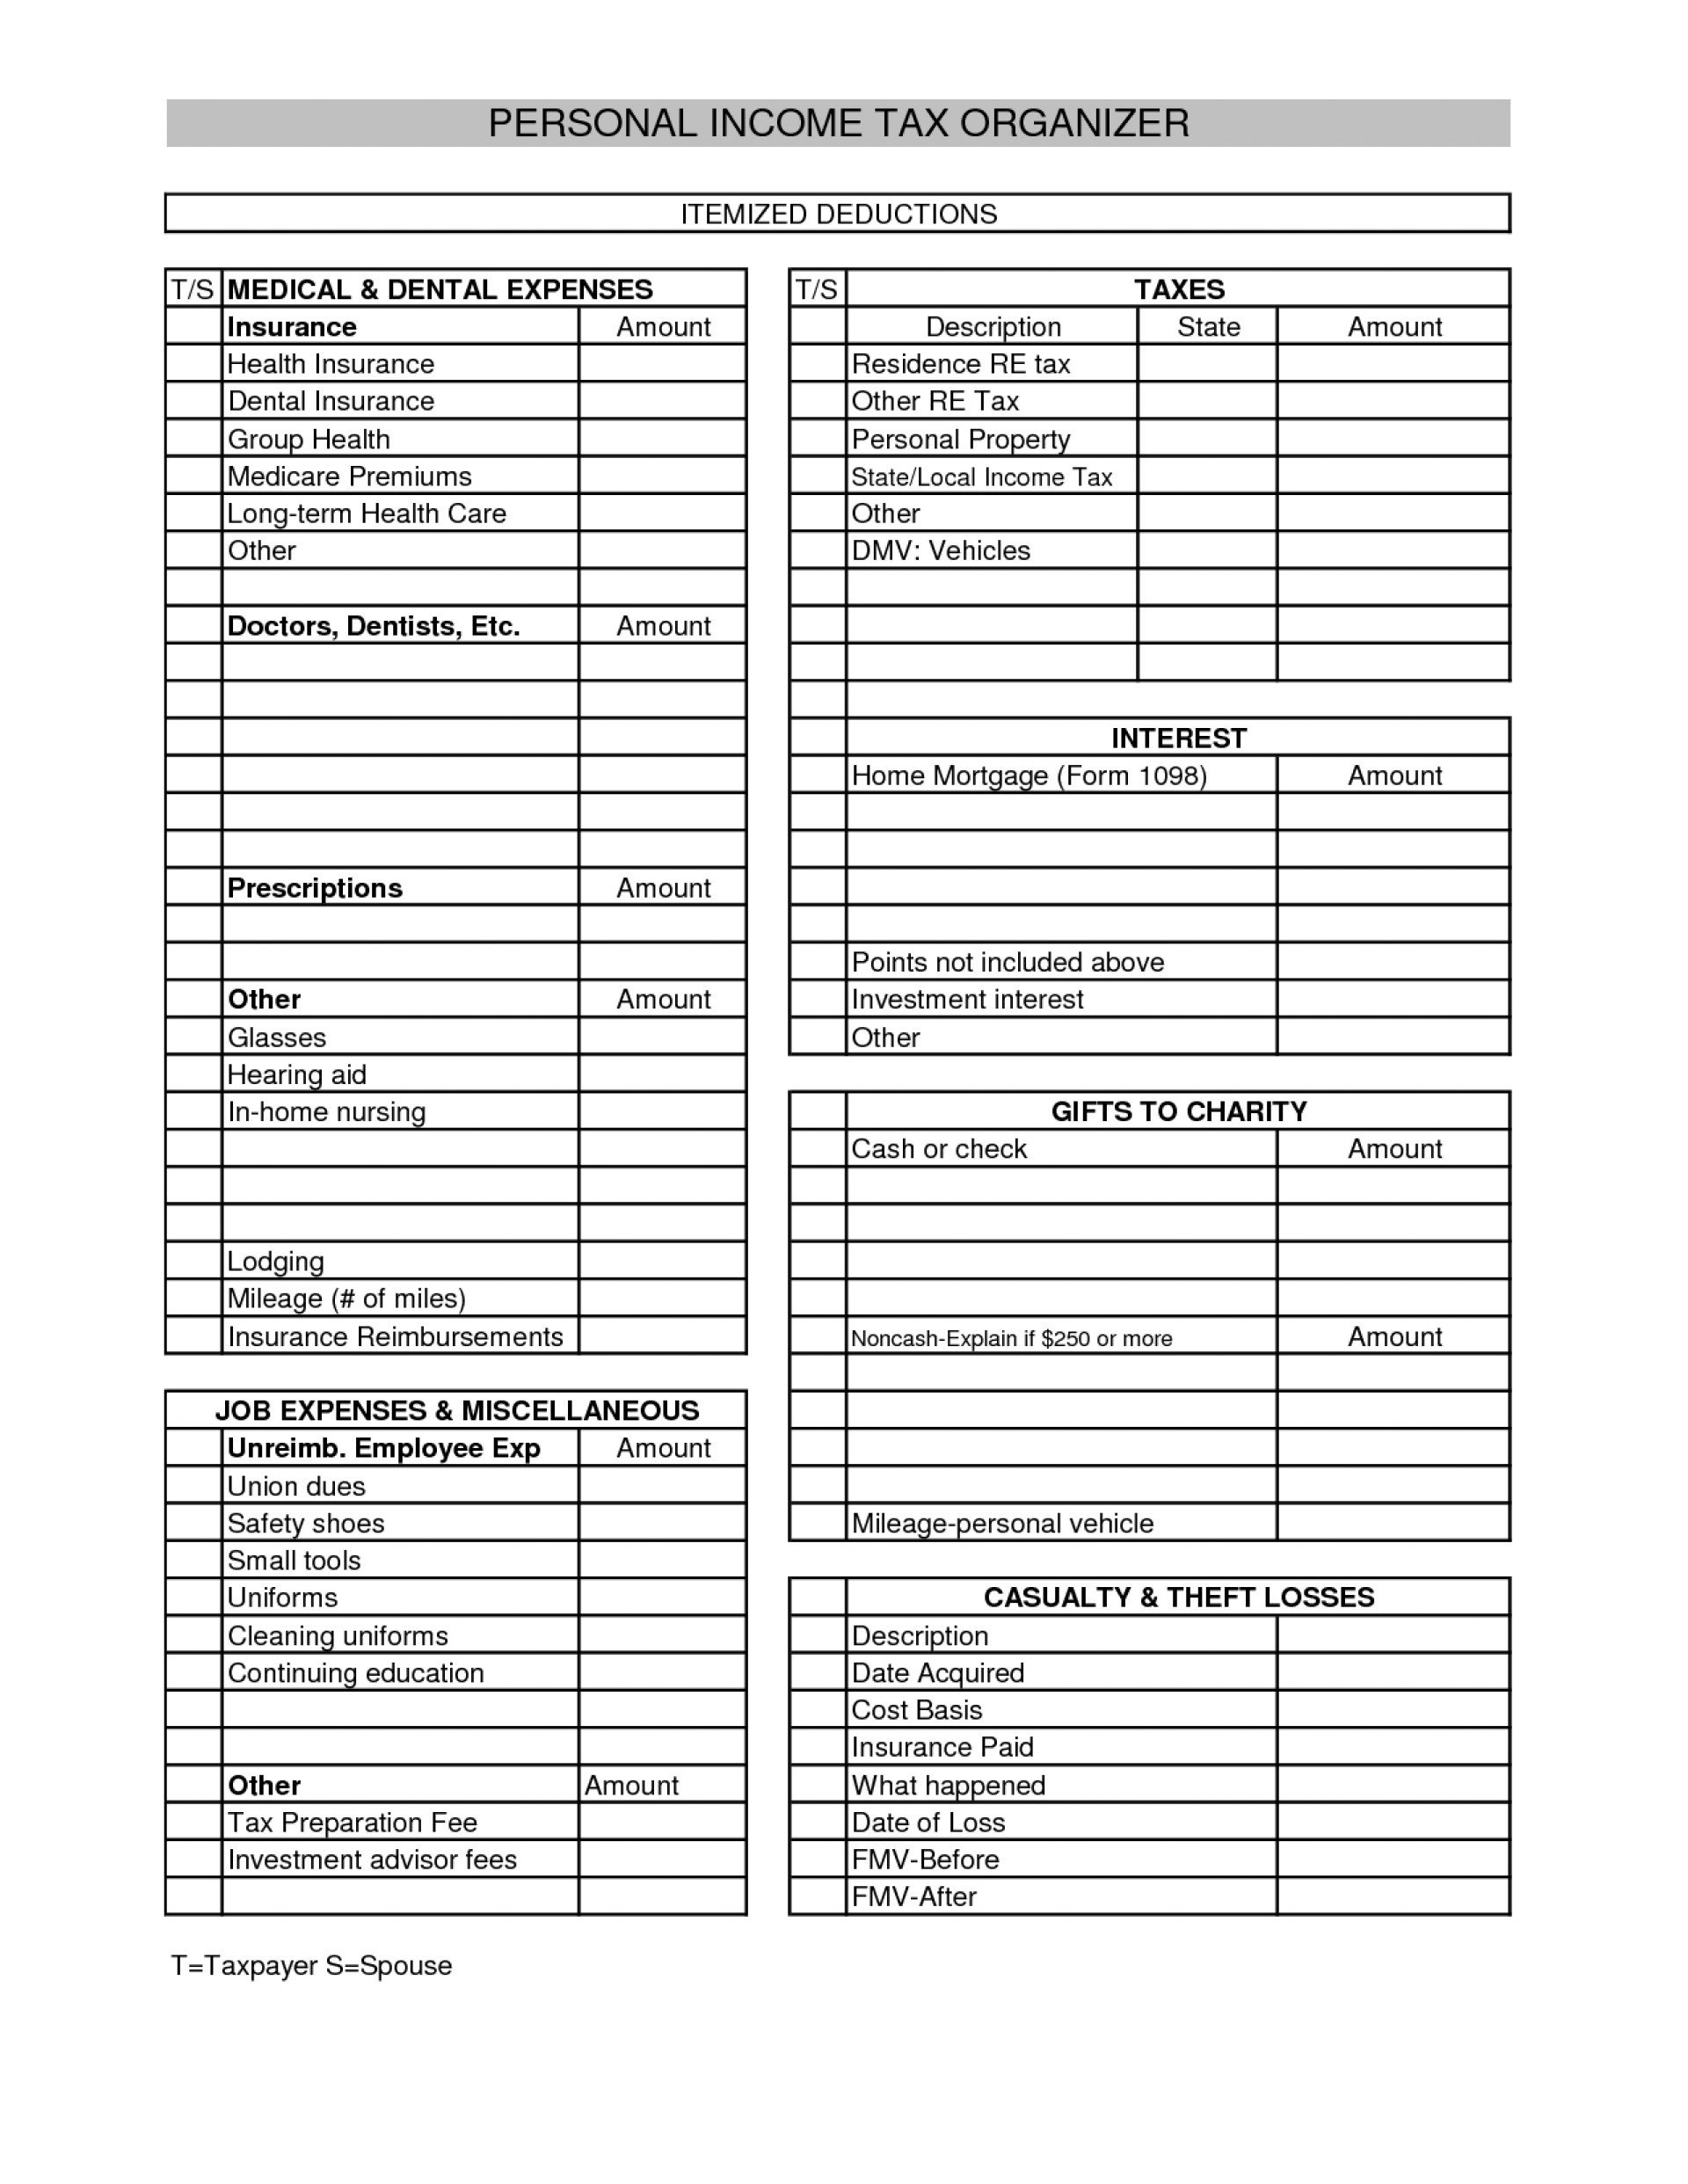 Irs Itemized Deductions Worksheet  Yooob With Regard To Irs Itemized Deductions Worksheet